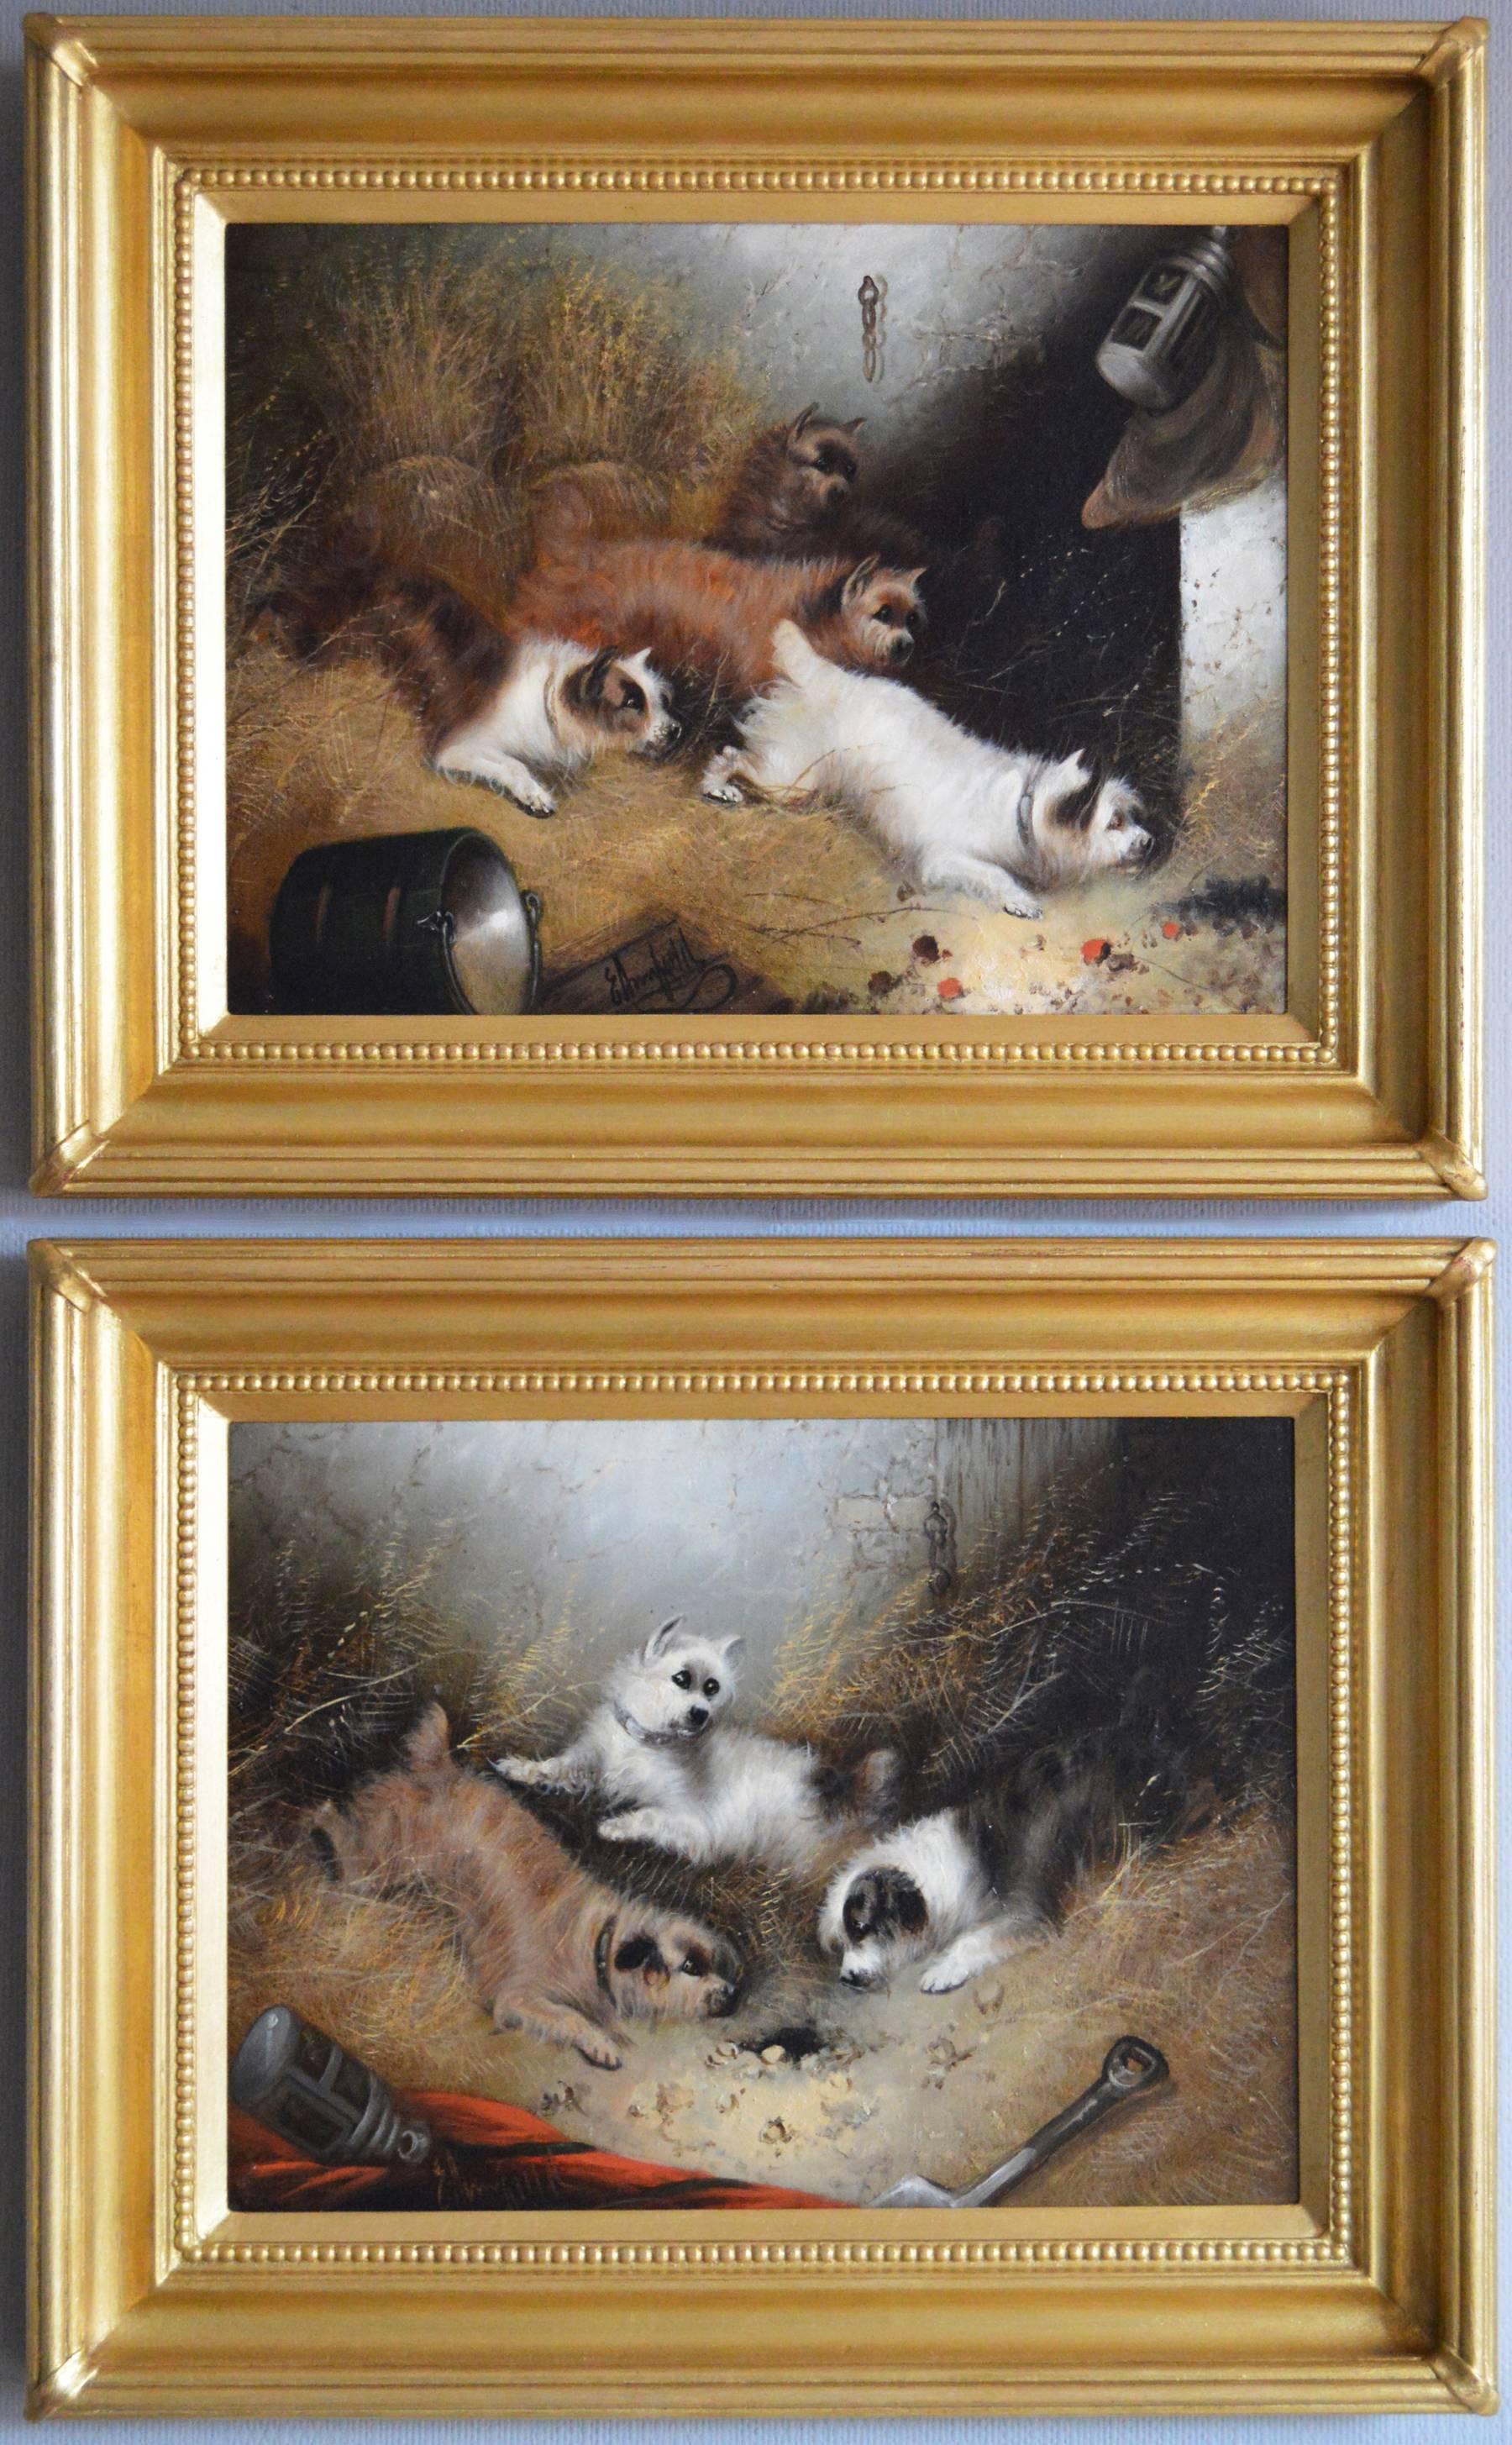 19th Century pair of oil paintings with terriers ratting in a barn